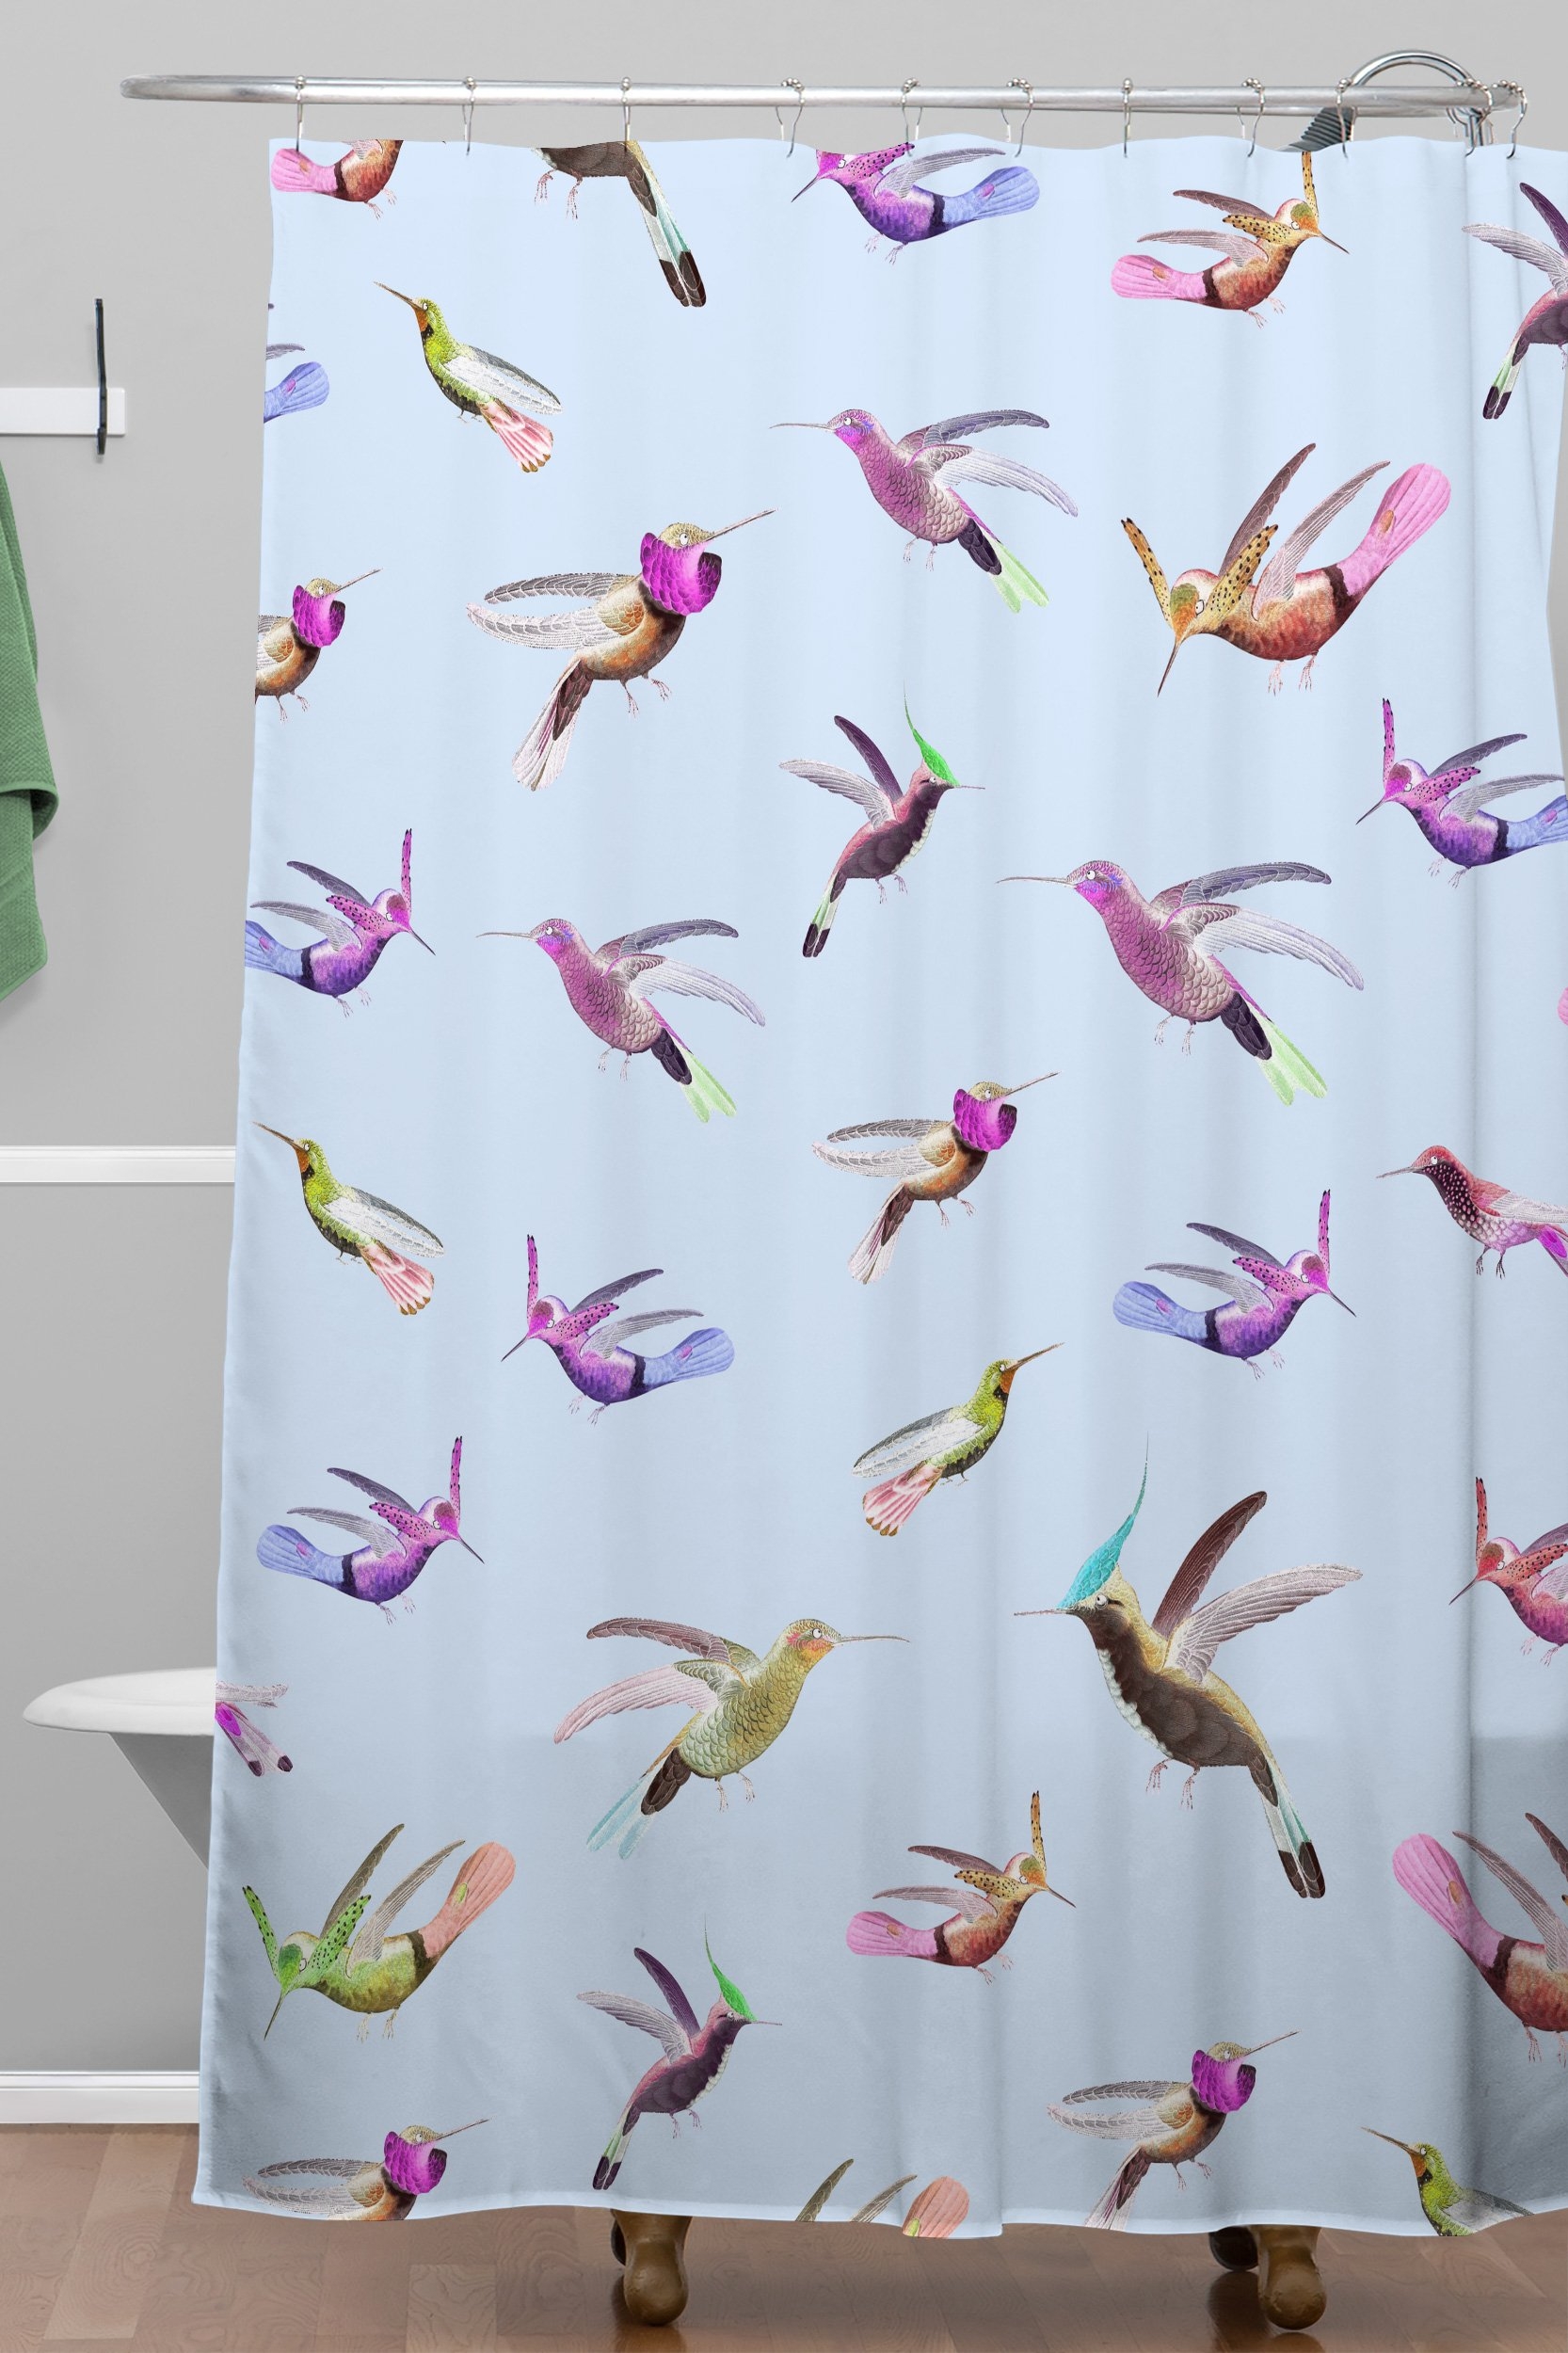 Iveta Abolina Colibri Garden Shower Curtain - Standard 71"x74" with Rings - Image 1